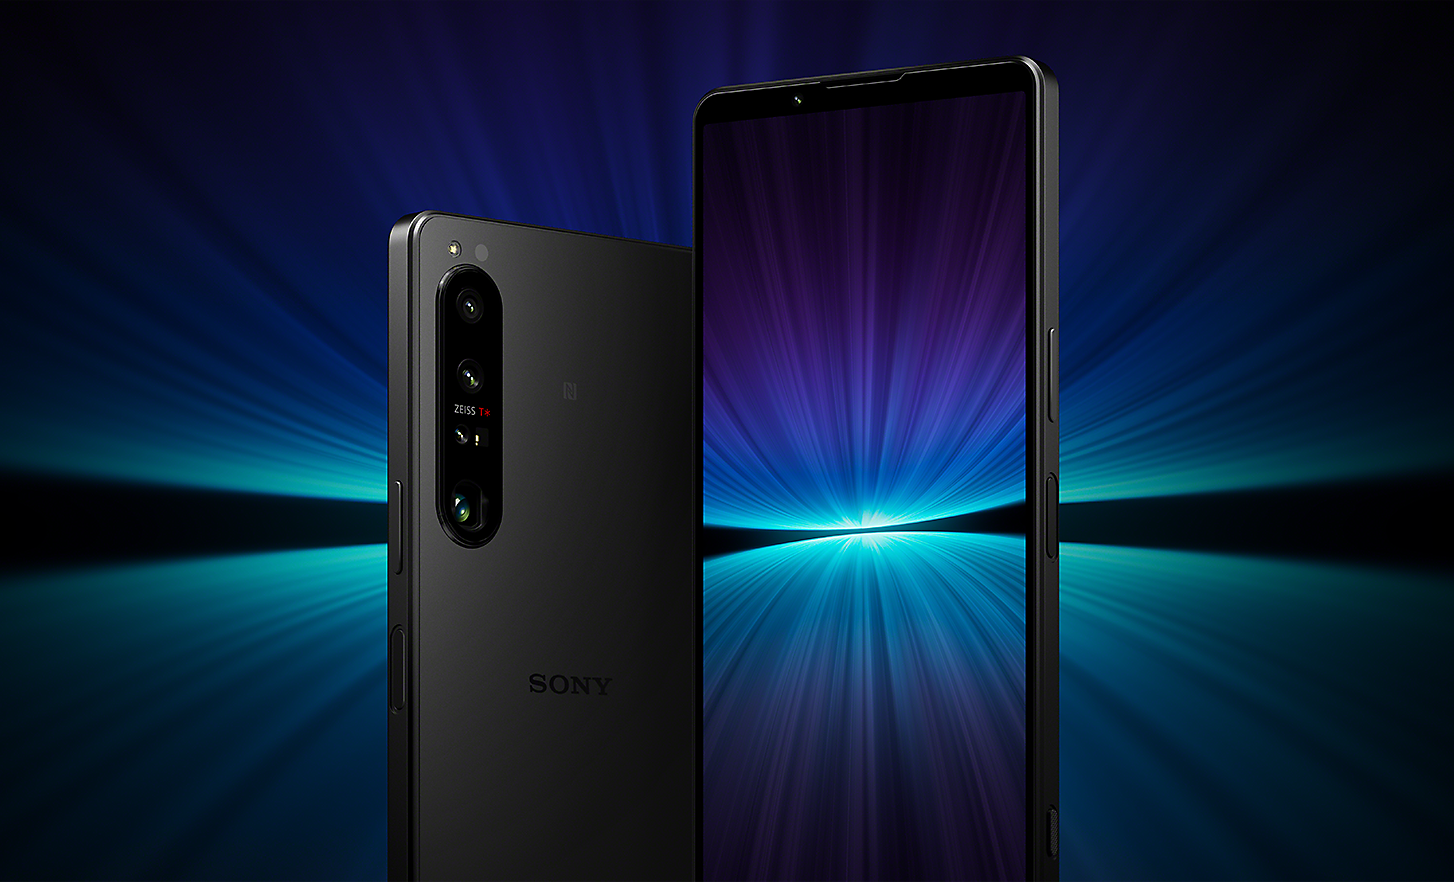 Front and rear views of Xperia 1 IV with an abstract image of speeding light on the display